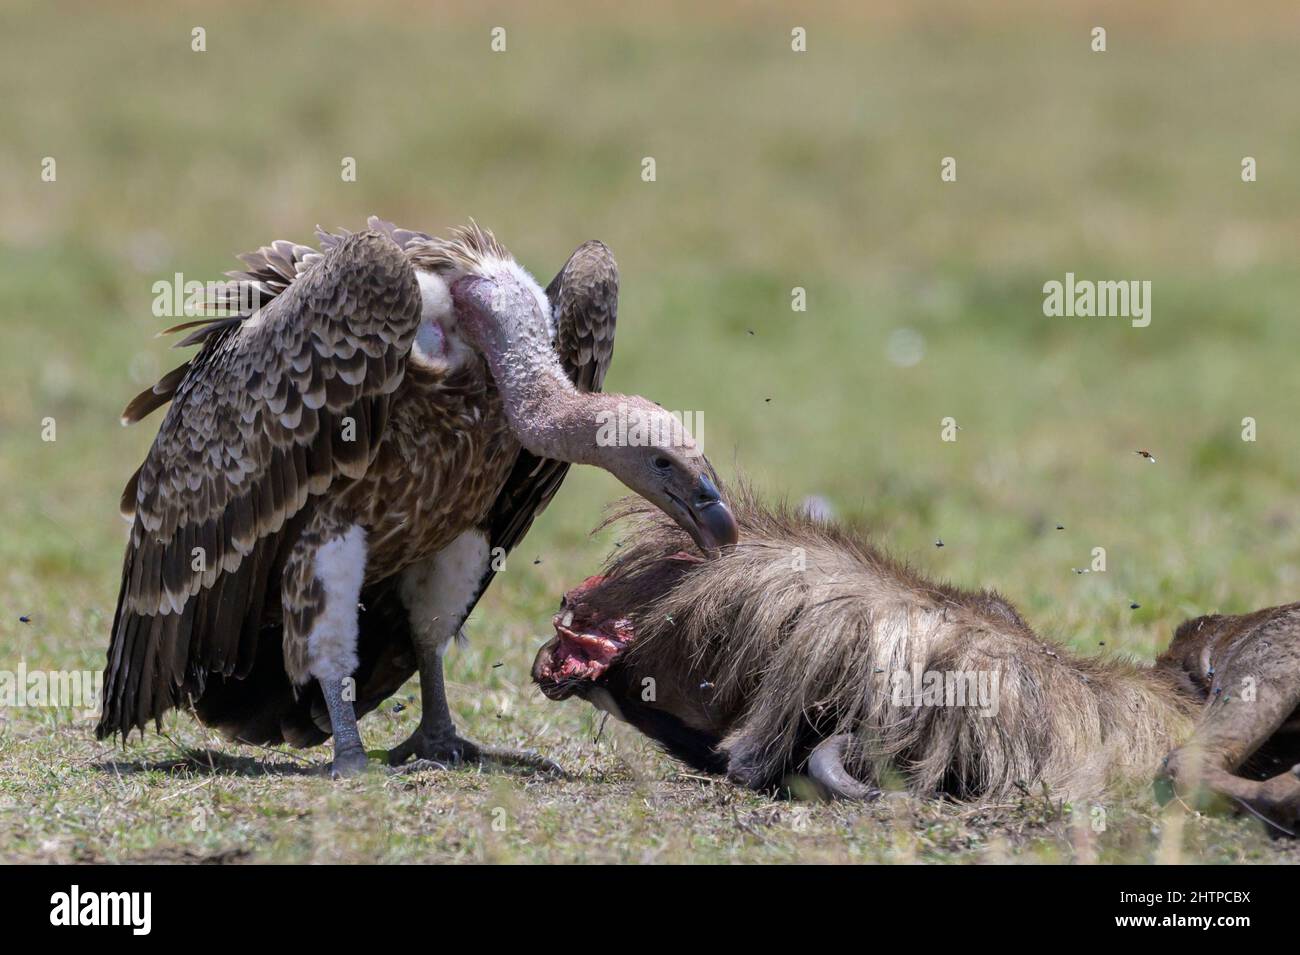 White-backed Vulture (Gyps africanus) eating from a wildebeest carcass on savanna, Serengeti national park, Tanzania. Stock Photo